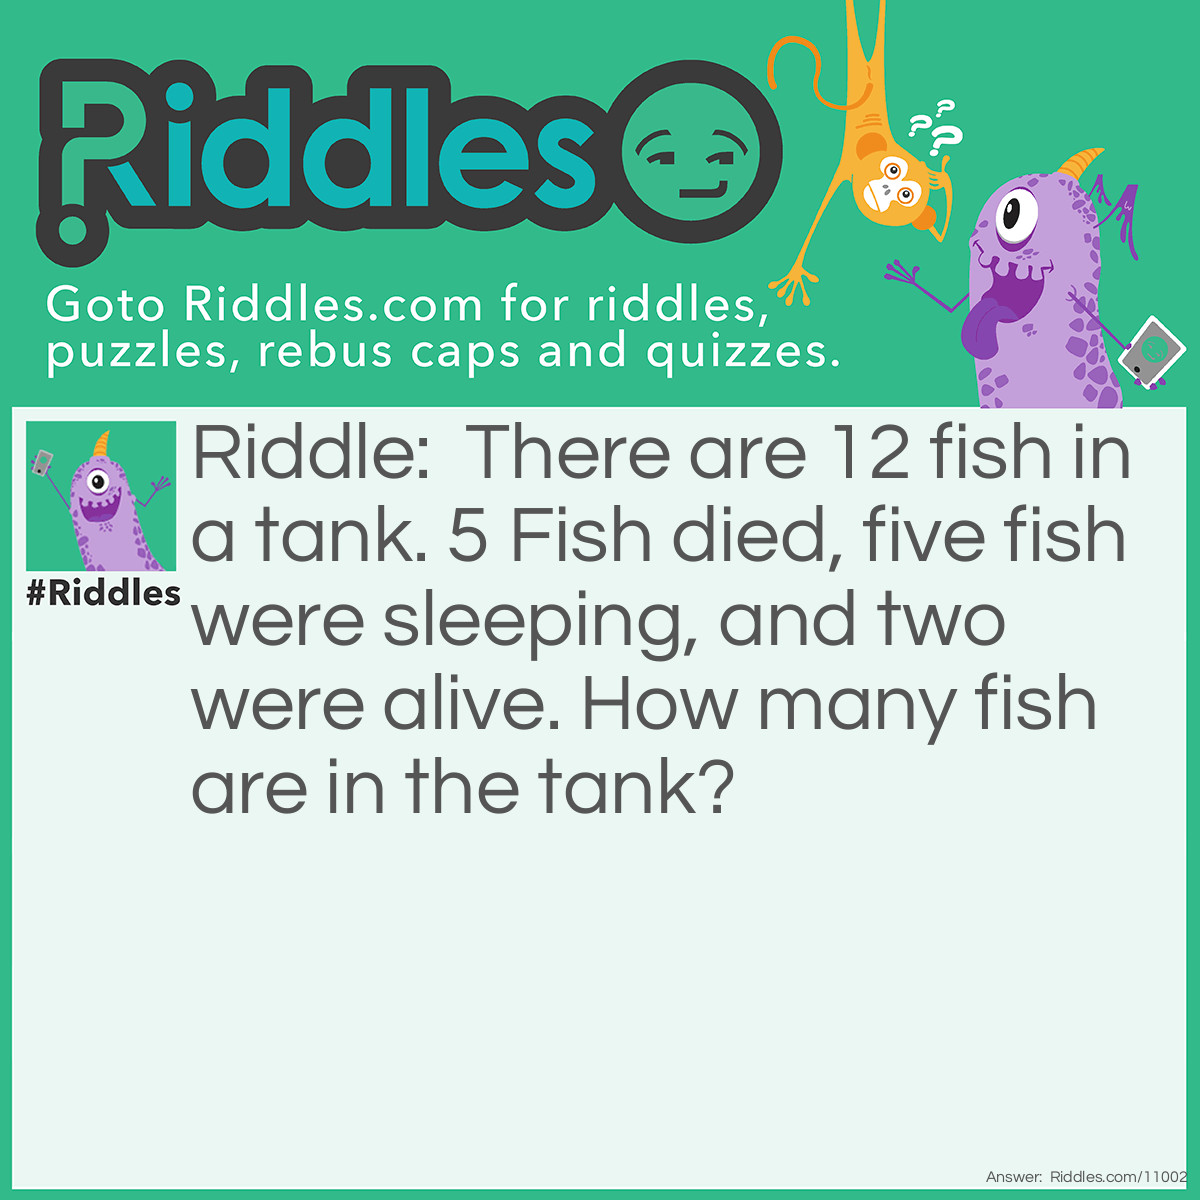 Riddle: There are 12 fish in a tank. 5 Fish died, five fish were sleeping, and two were alive. How many fish are in the tank? Answer: There’s still 12 fish in the tank even know they died or were sleeping they were still inside of the tank.